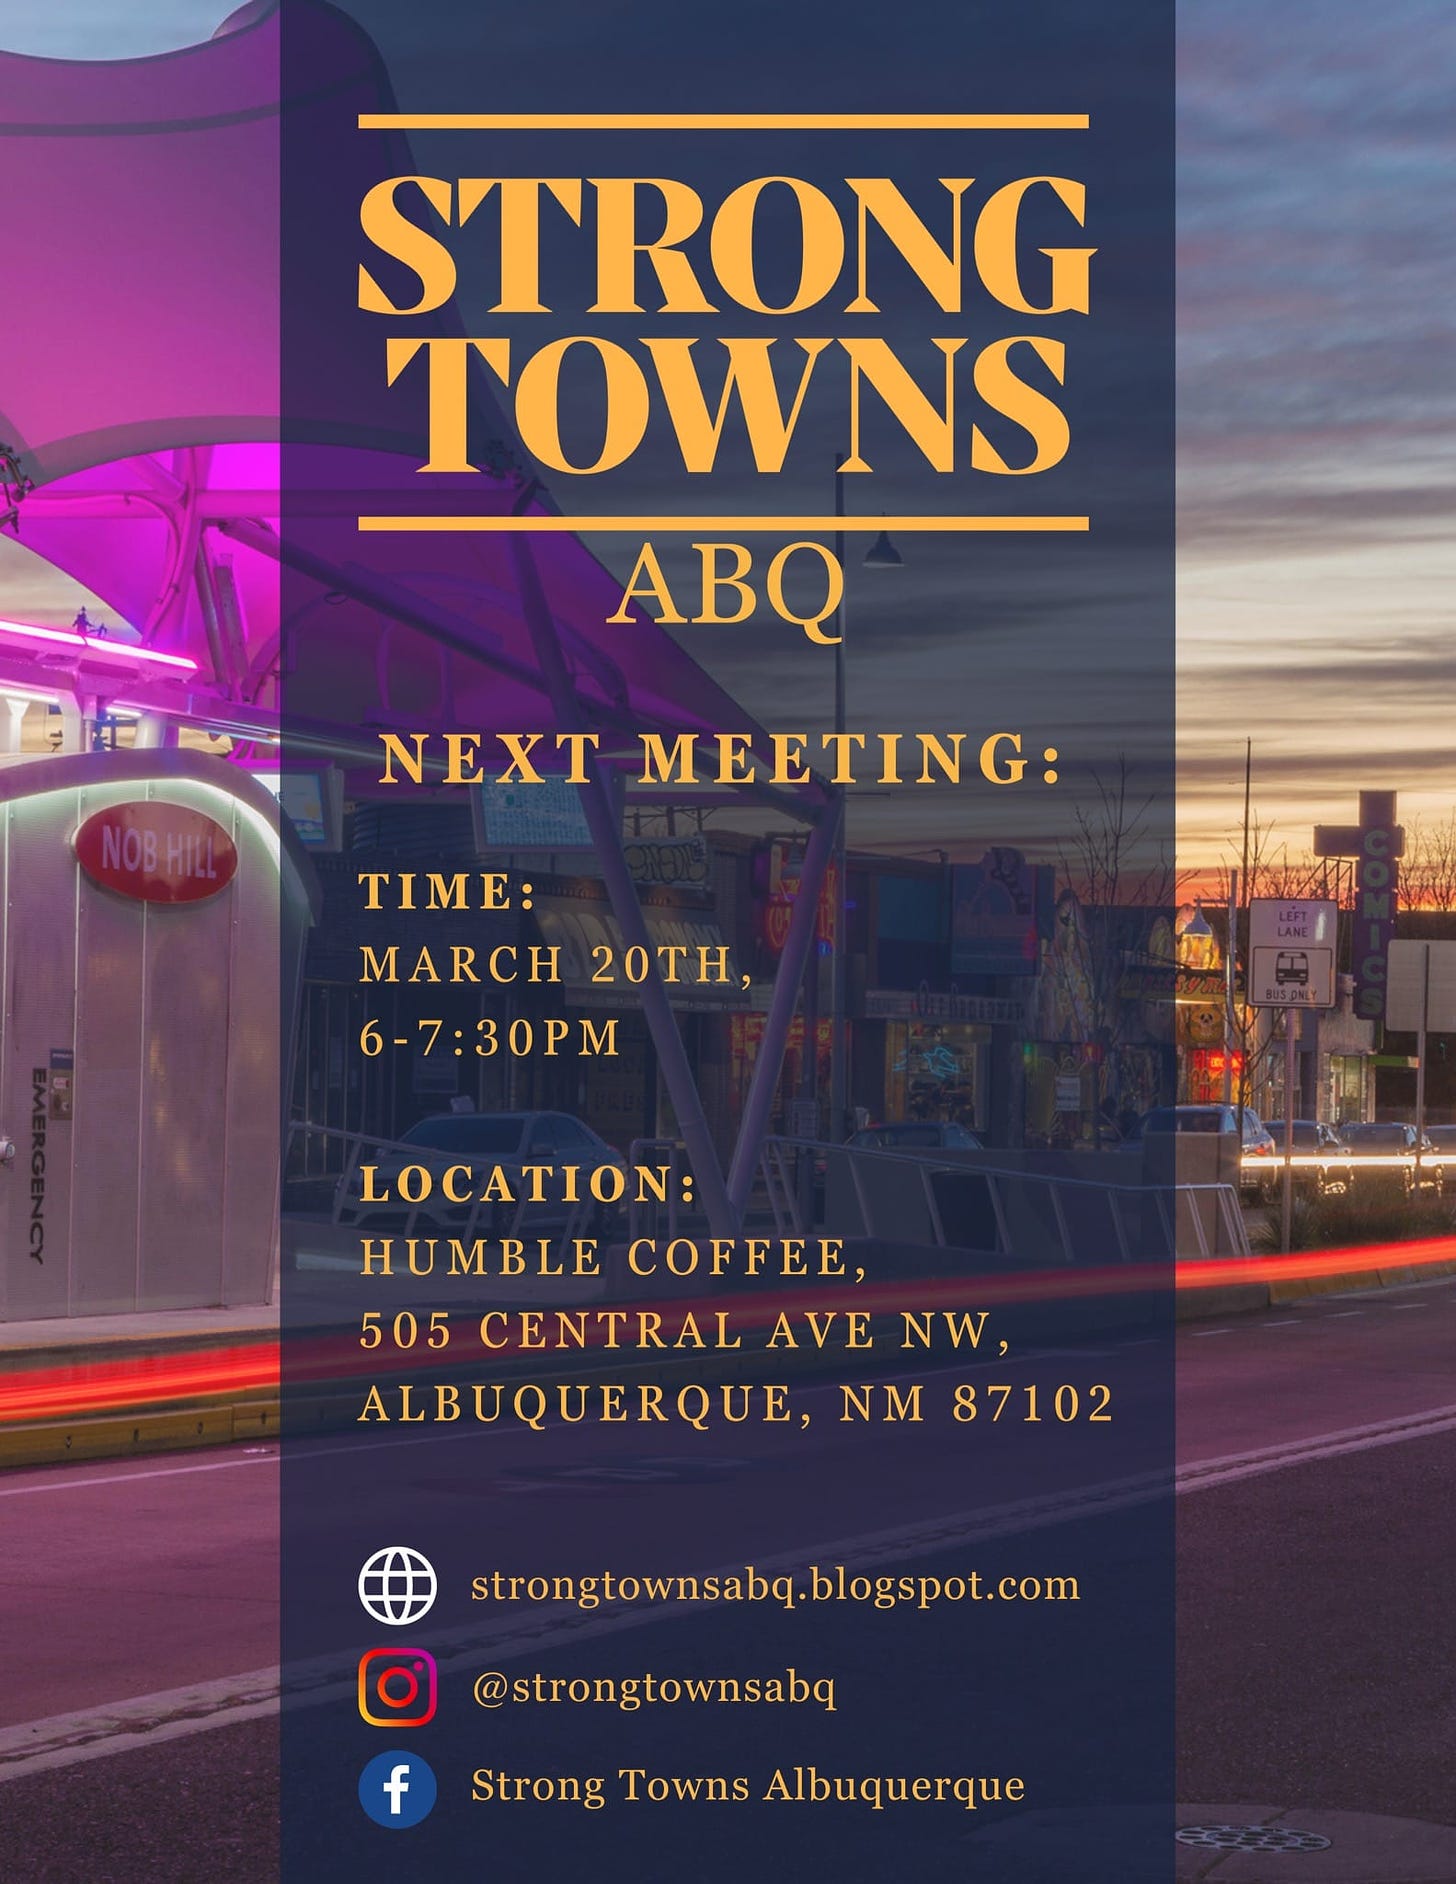 May be an image of text that says 'STRONG TOWNS ABQ NEXT MEETING: TIME: MARCH 20TH, 6-7:30PM LOCATION: HUMBLE COFFEE, 505 CENTRAL AVE NW, ALBUQUERQUE, NM 87102 strongtownsabq.blogspot.com blogspot.com @strongtownsabq f Strong Towns Albuquerque'